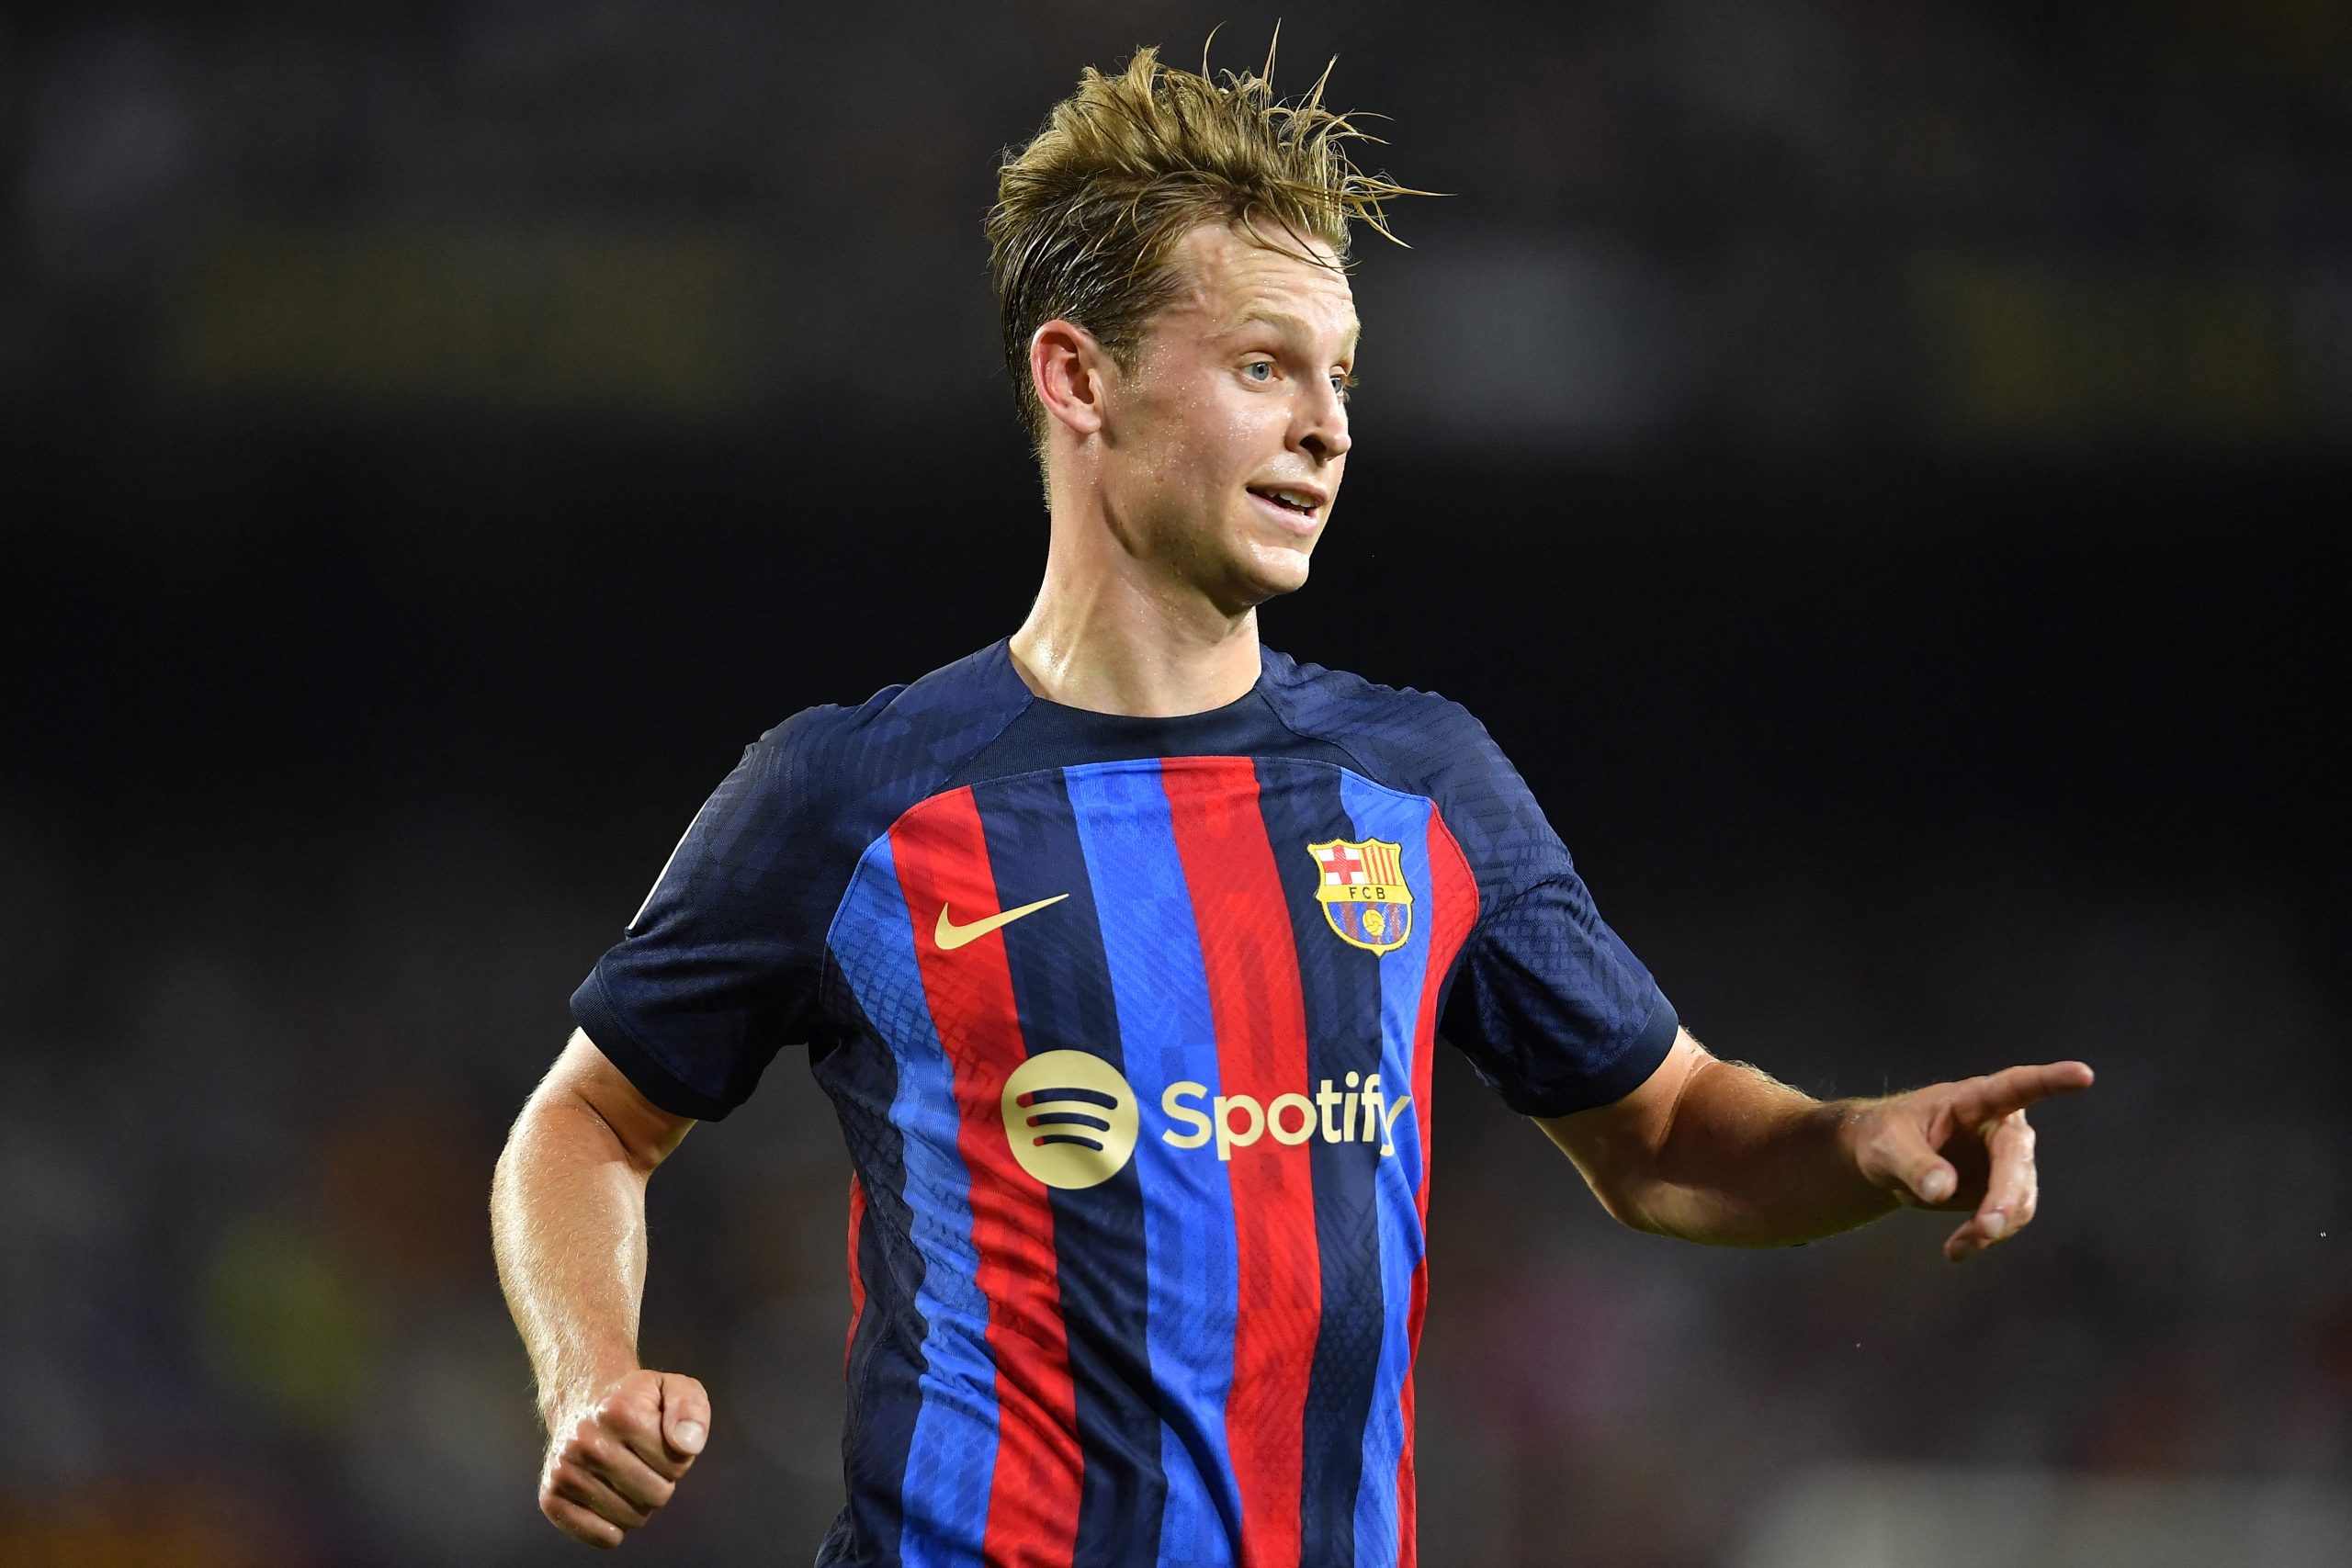 Barcelona to reconsider Frenkie de Jong stance if Manchester United revisit interest in coming transfer windows.